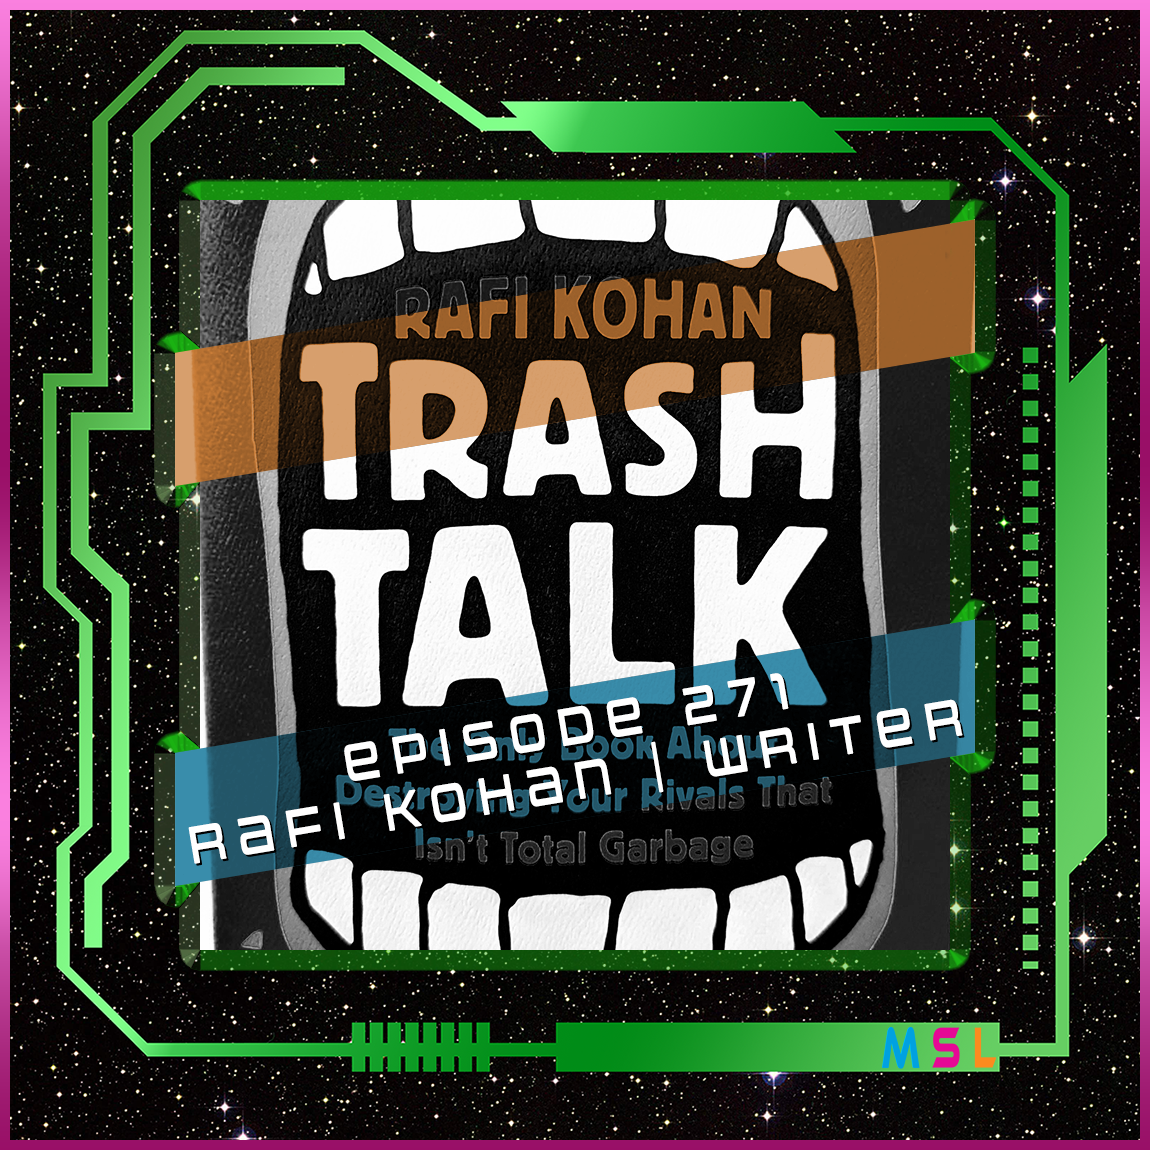 271 | Rafi Kohan (Trash Talk: The Only Book About Destroying Your Rivals)